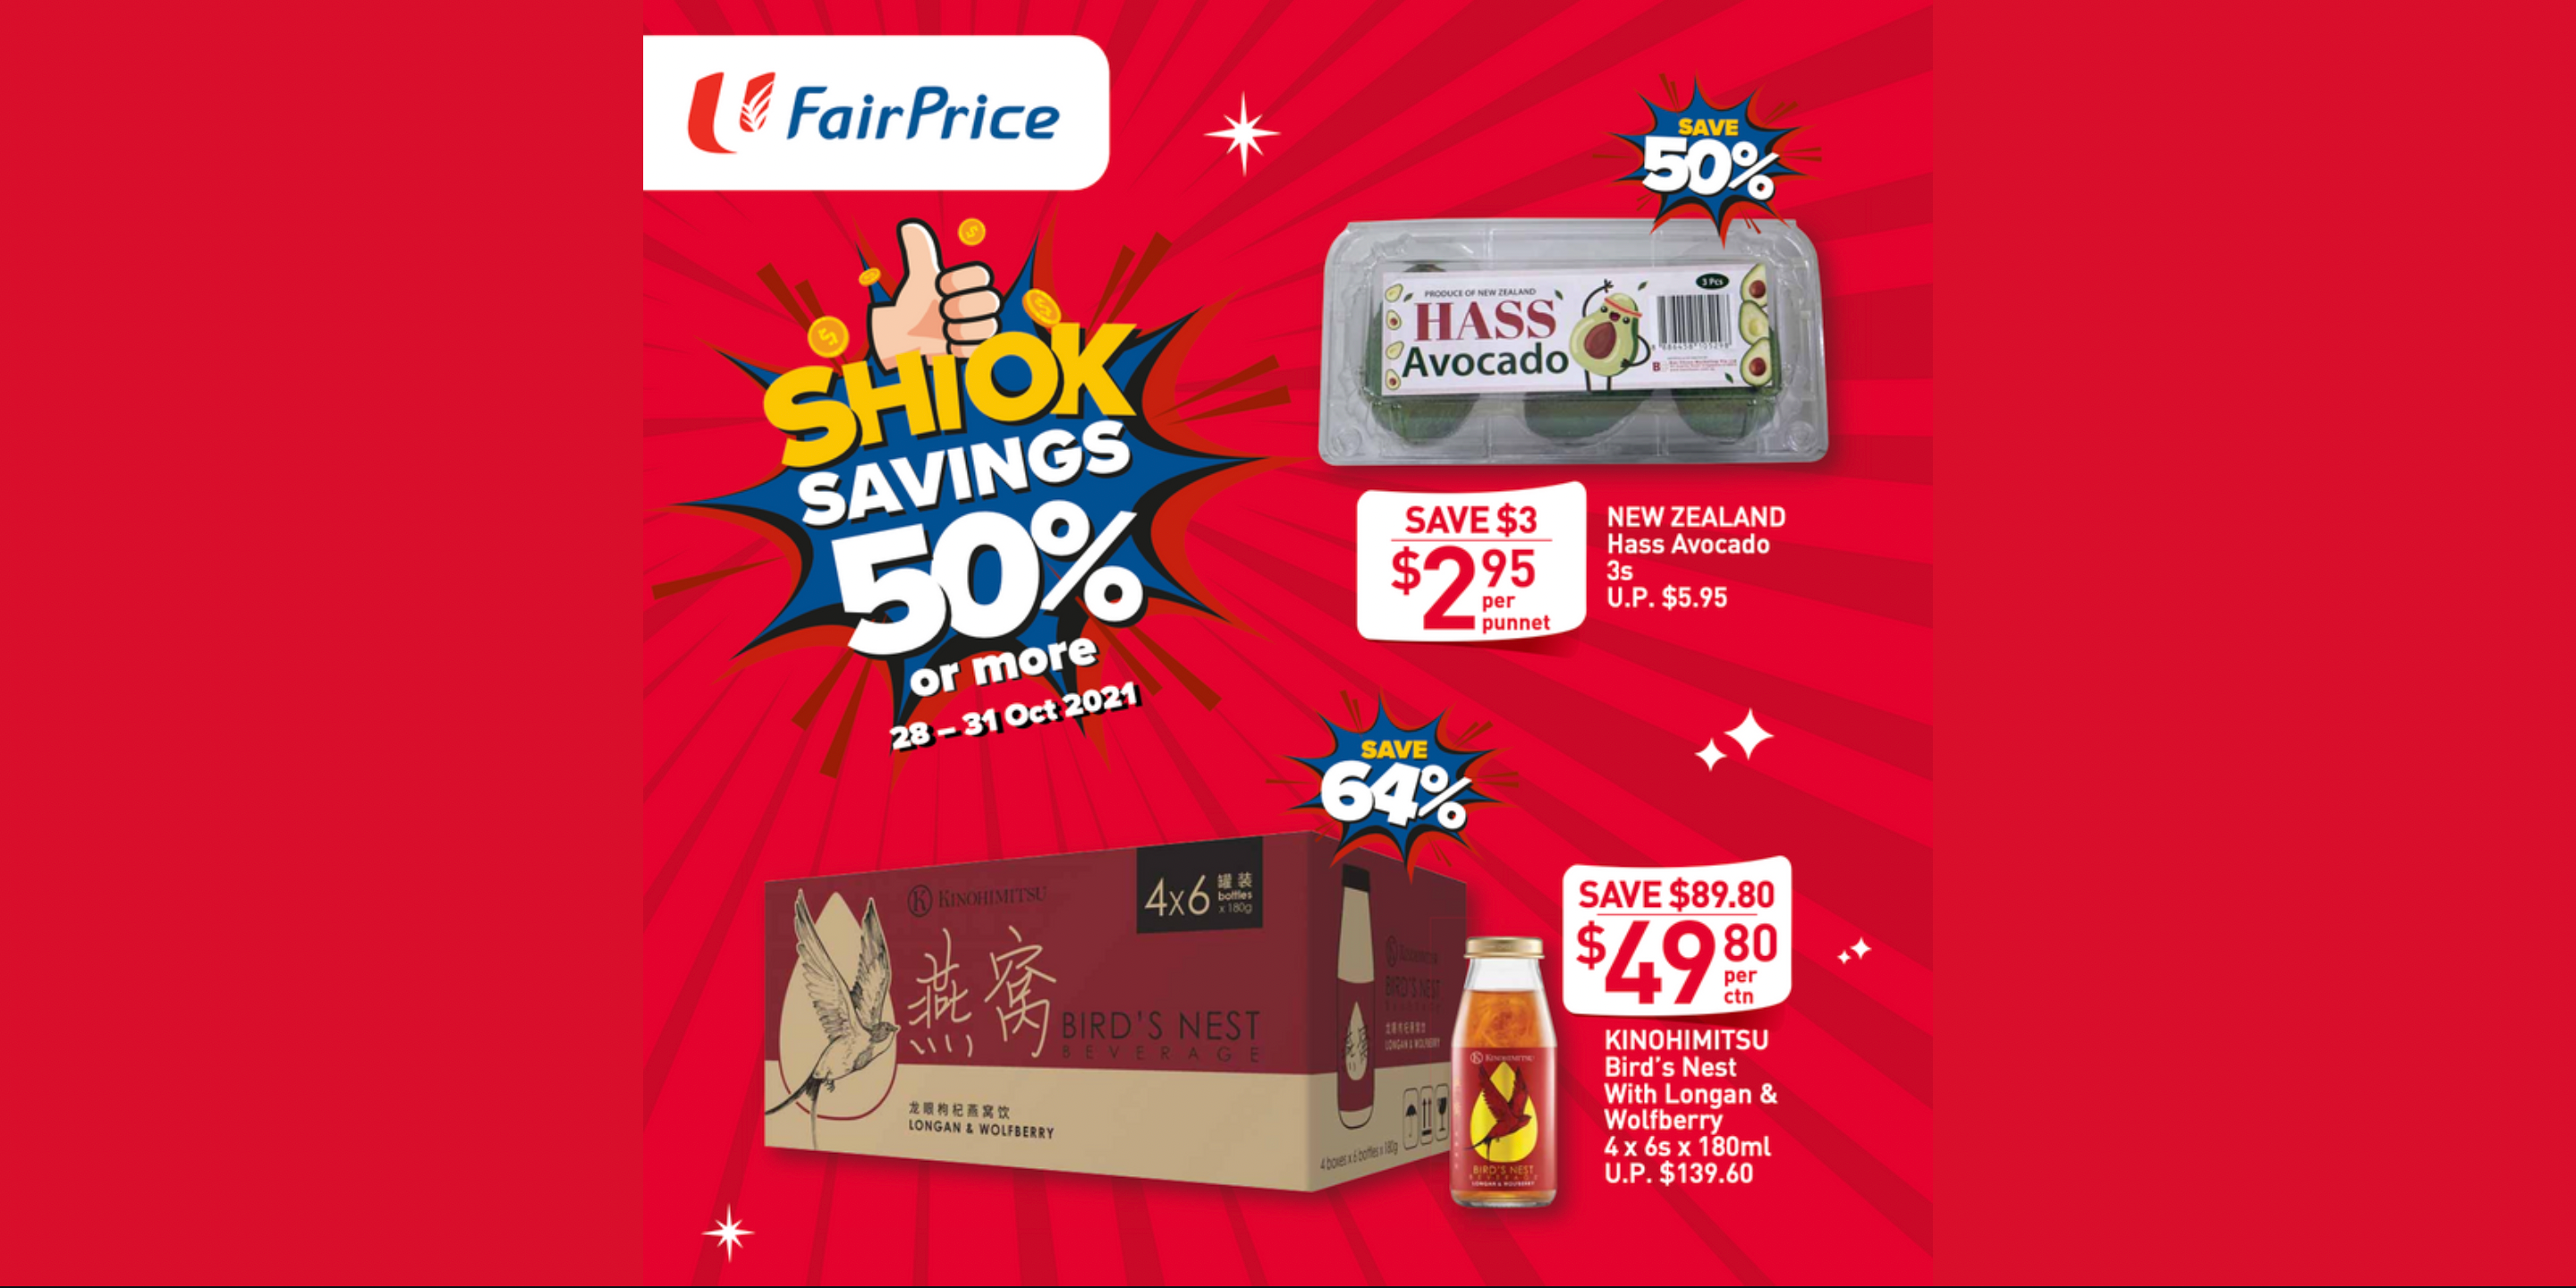 [Flash Deal] Enjoy Bird Nest at 60% OFF at selected FairPrice stores for 4 days only!